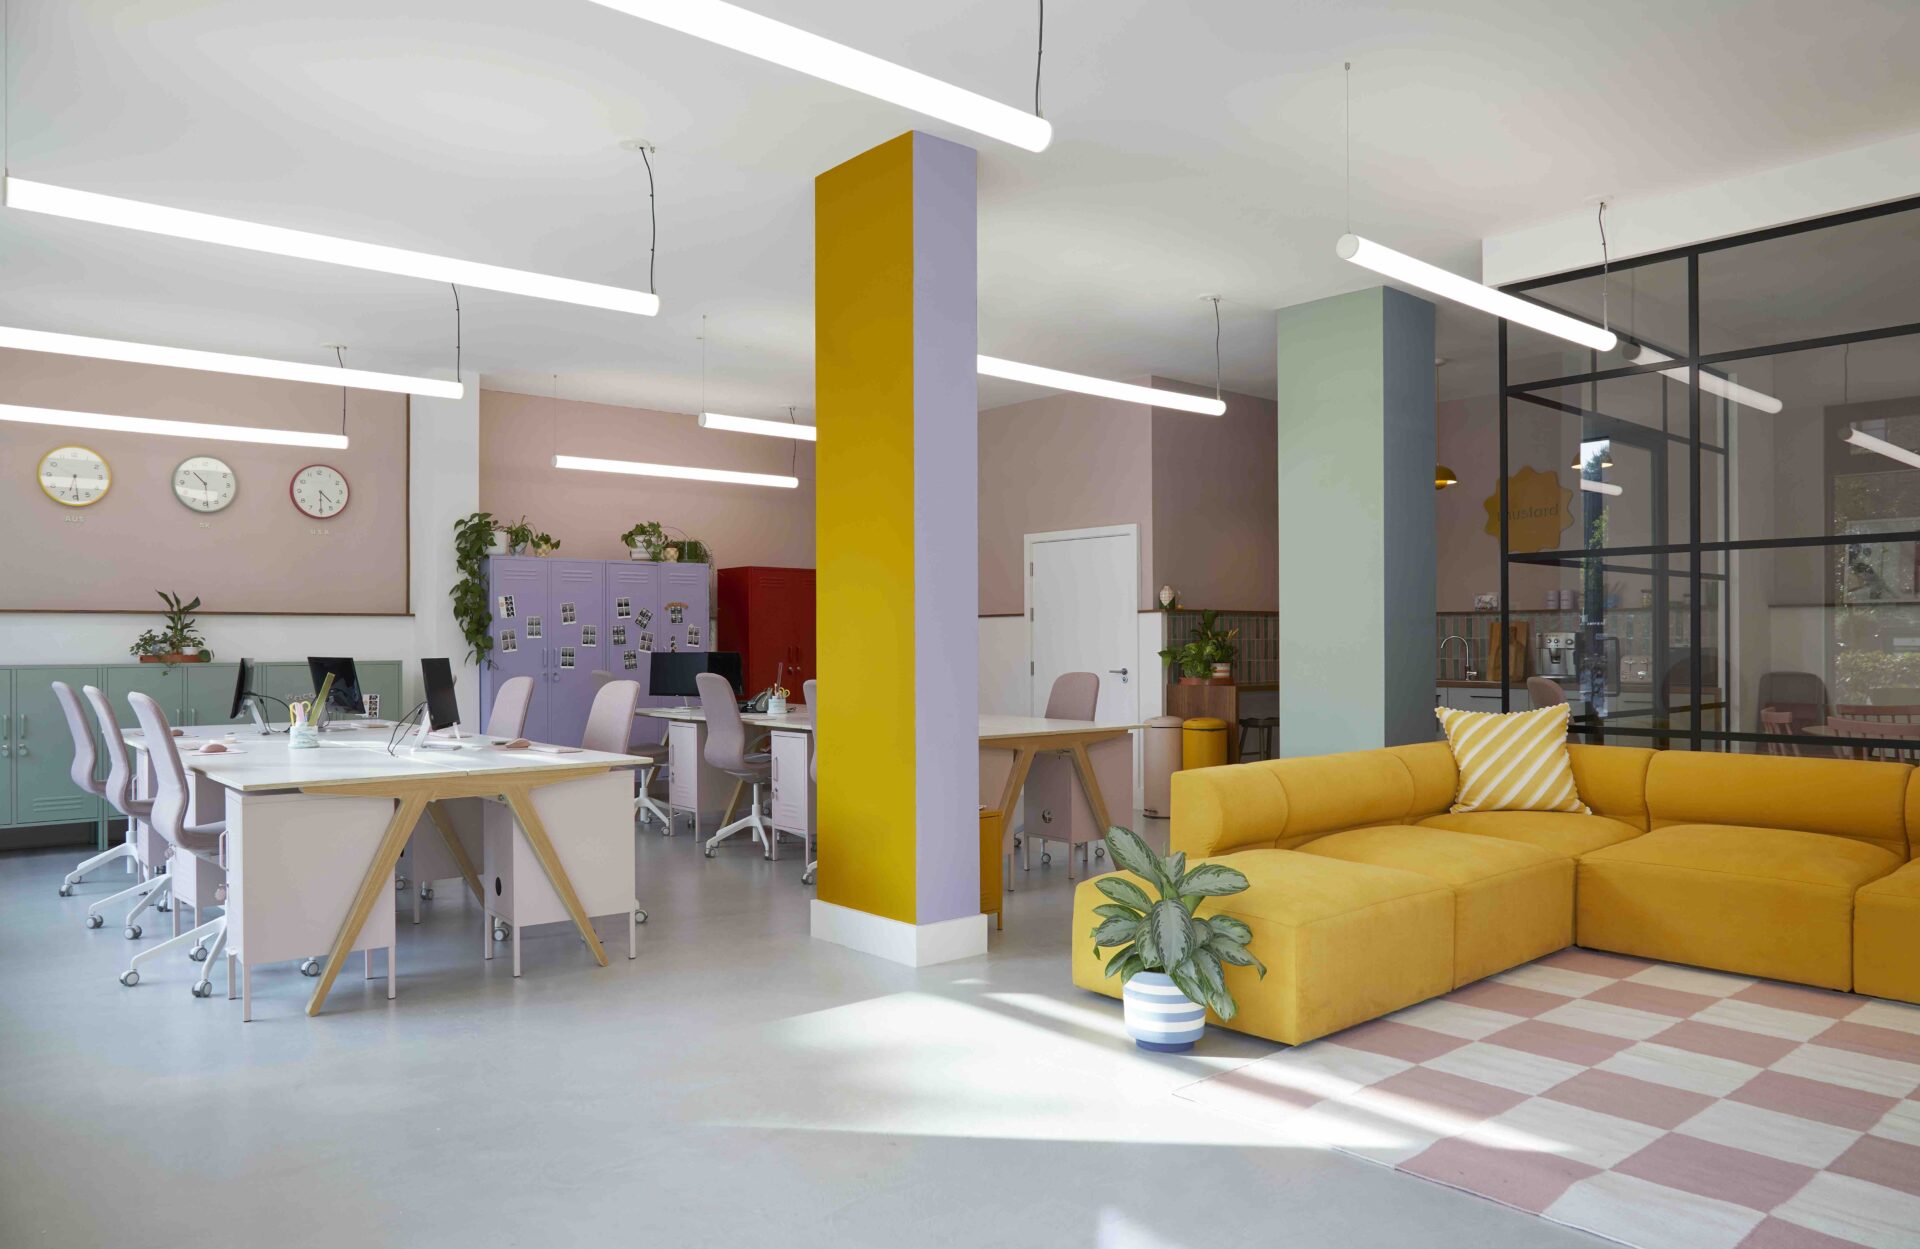 The Mustard Made London HQ Celebrates the Brand’s Colourful Identity